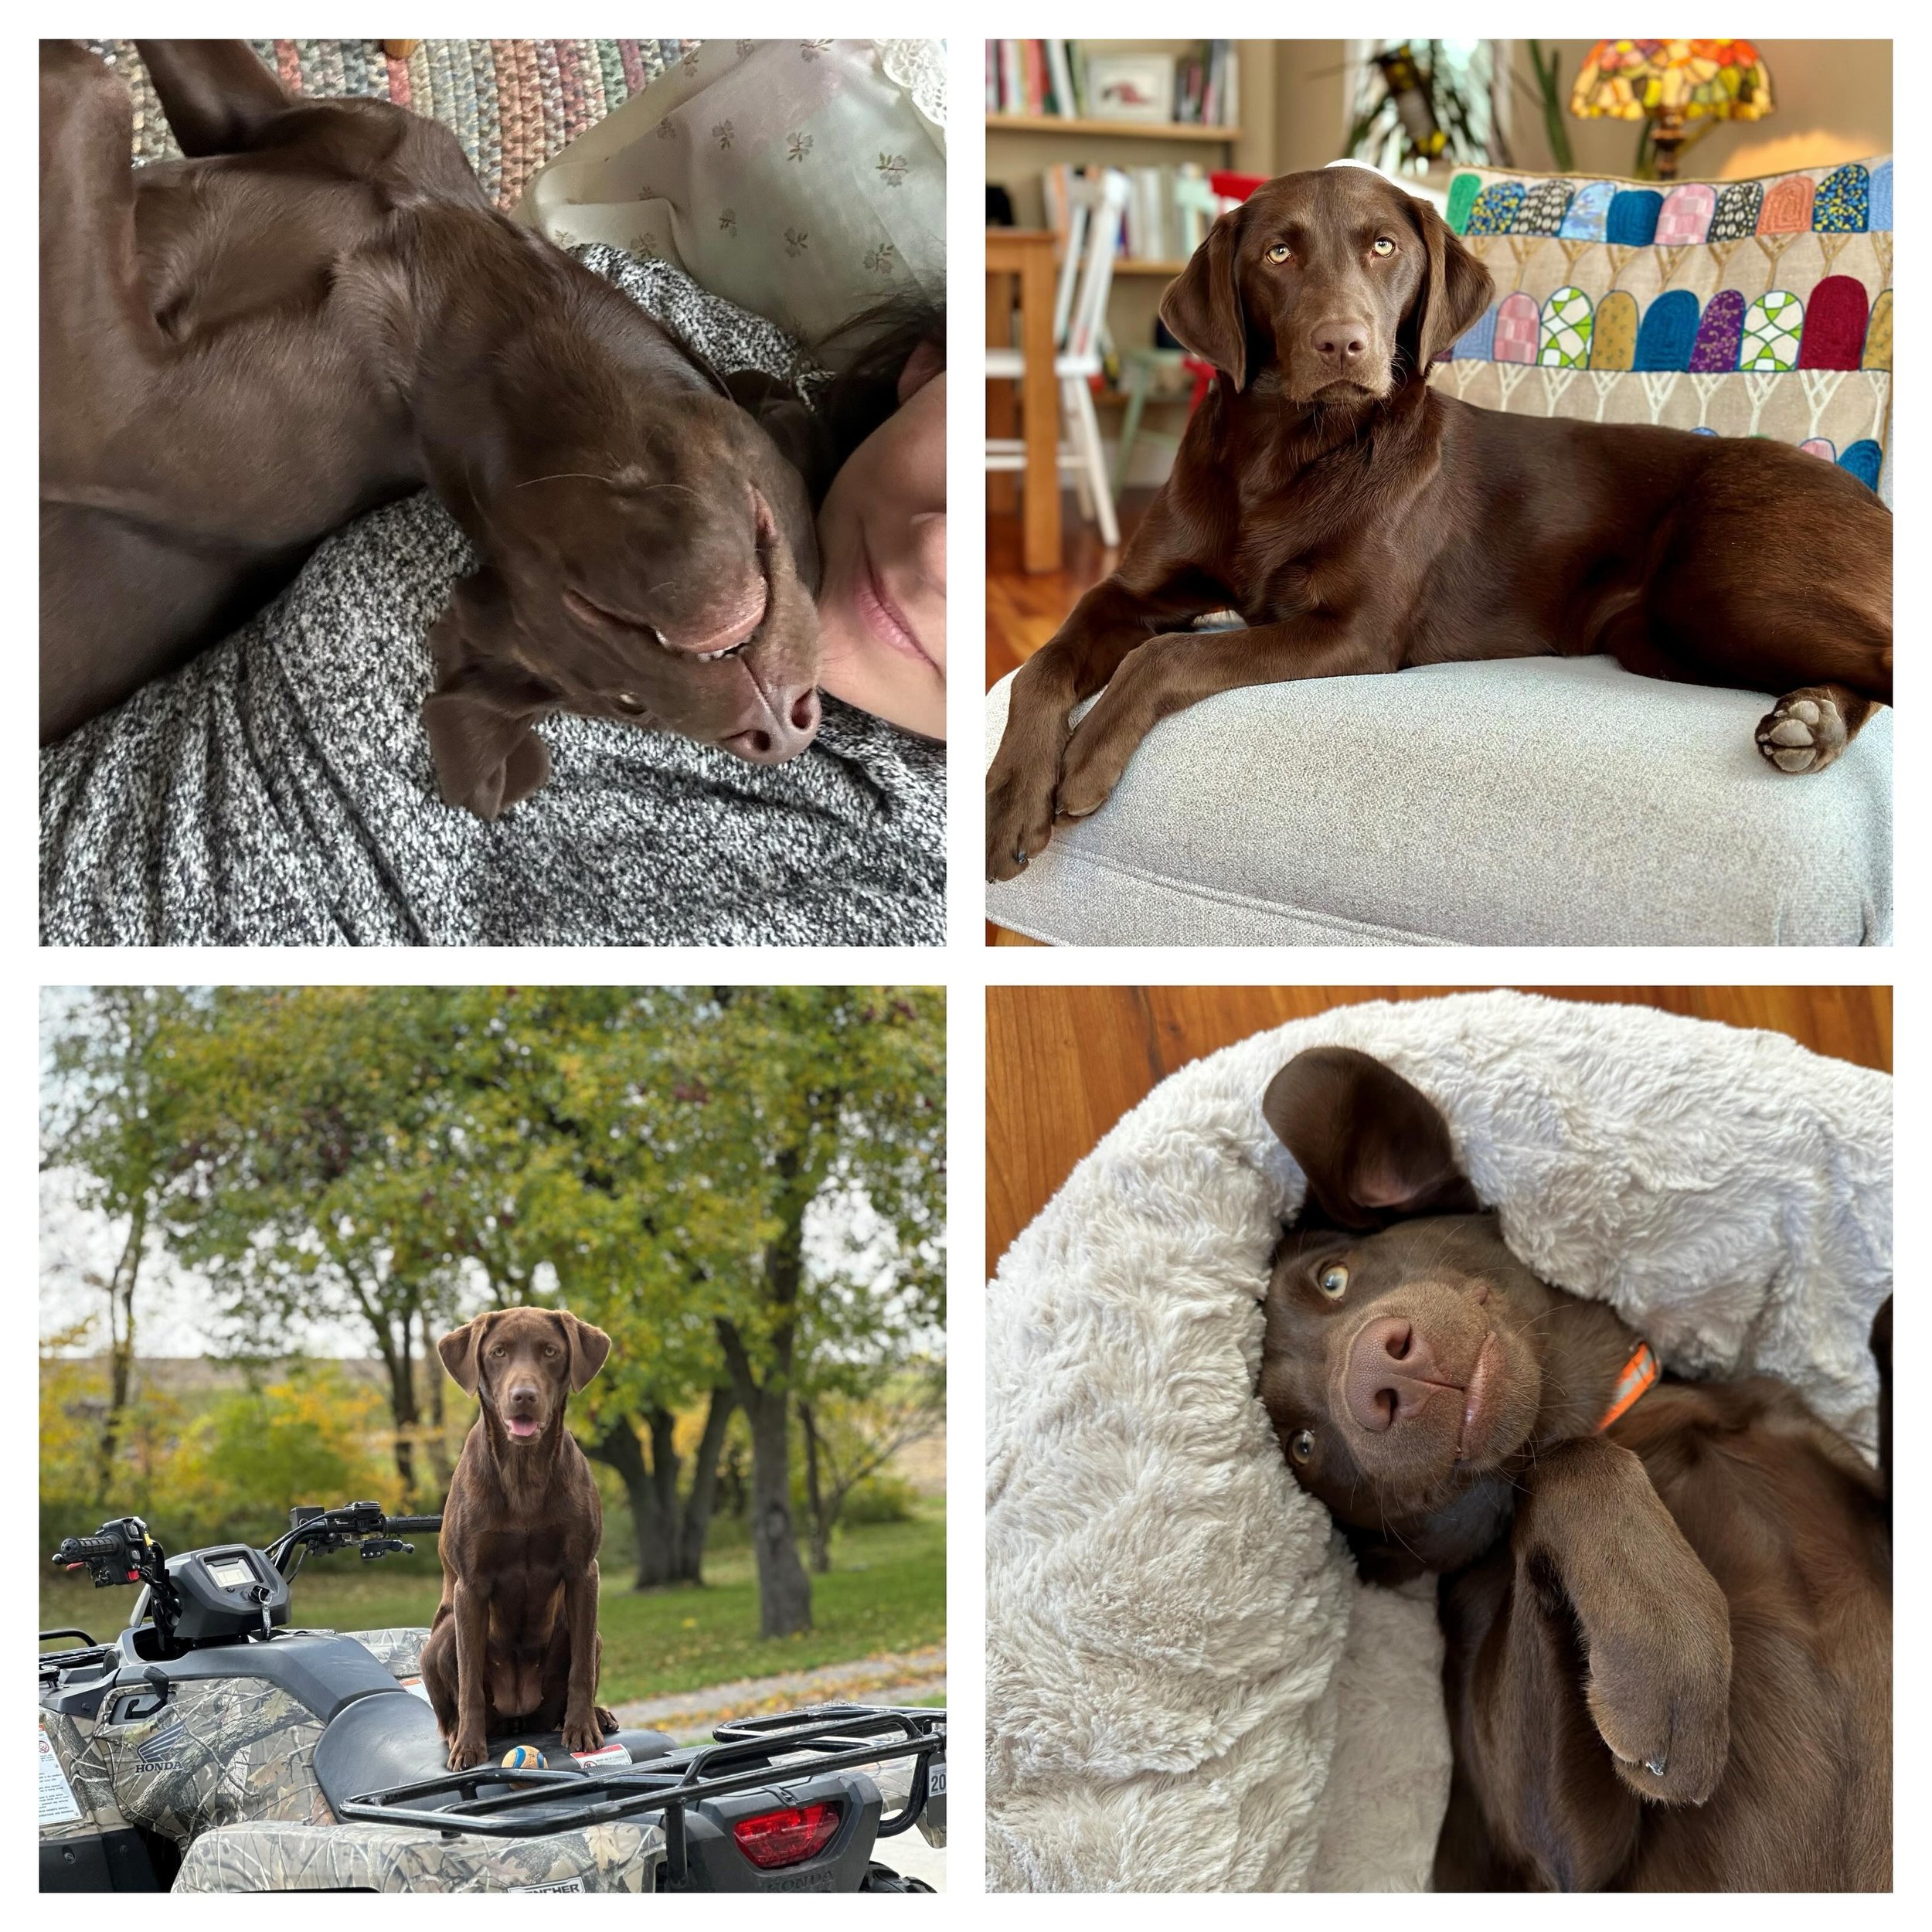 Dogs of BeyonDesign - Meet Ori! This little lady is 1 1/2 years young and lives at Big Maple Farm with Tiffany and her hubby. She&rsquo;s a Chocolate Lab and her favorite things are her ball, snuggles, and laying on her back! 

@bigmaplefarm
@tiffany